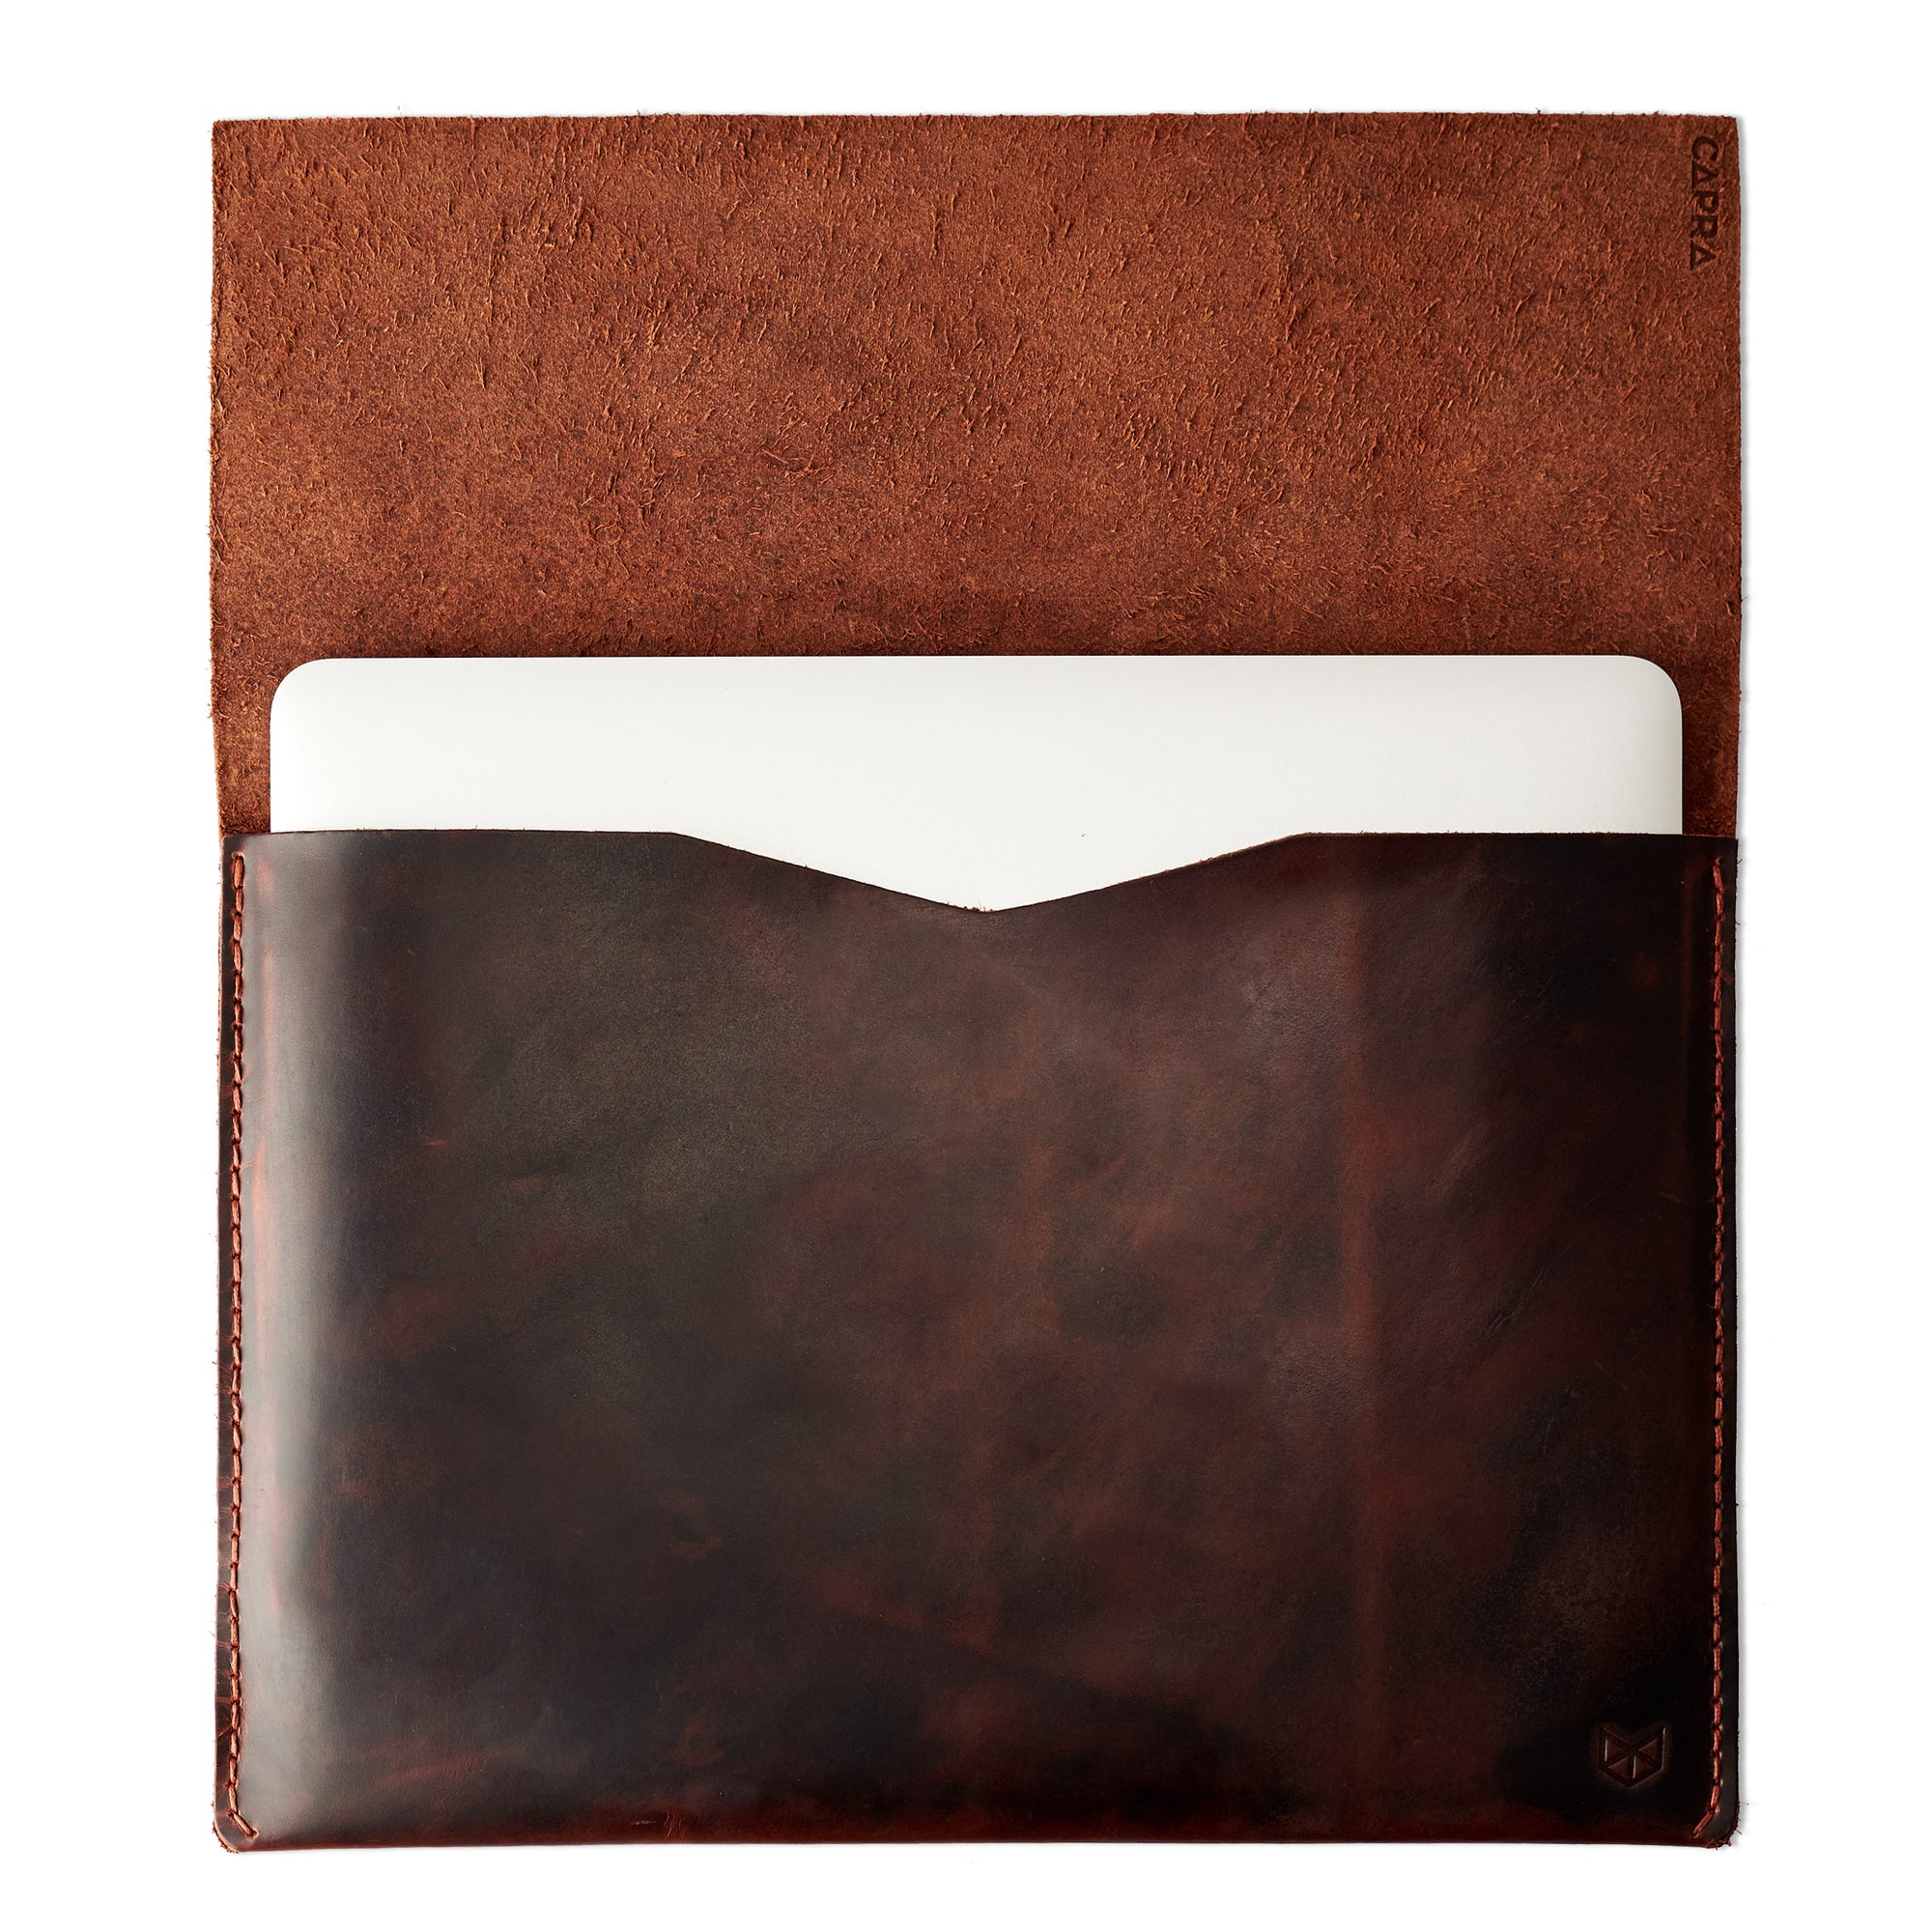 Soft interior red brown case. Leather Lenovo Yoga Sleeve Case by Capra Leather